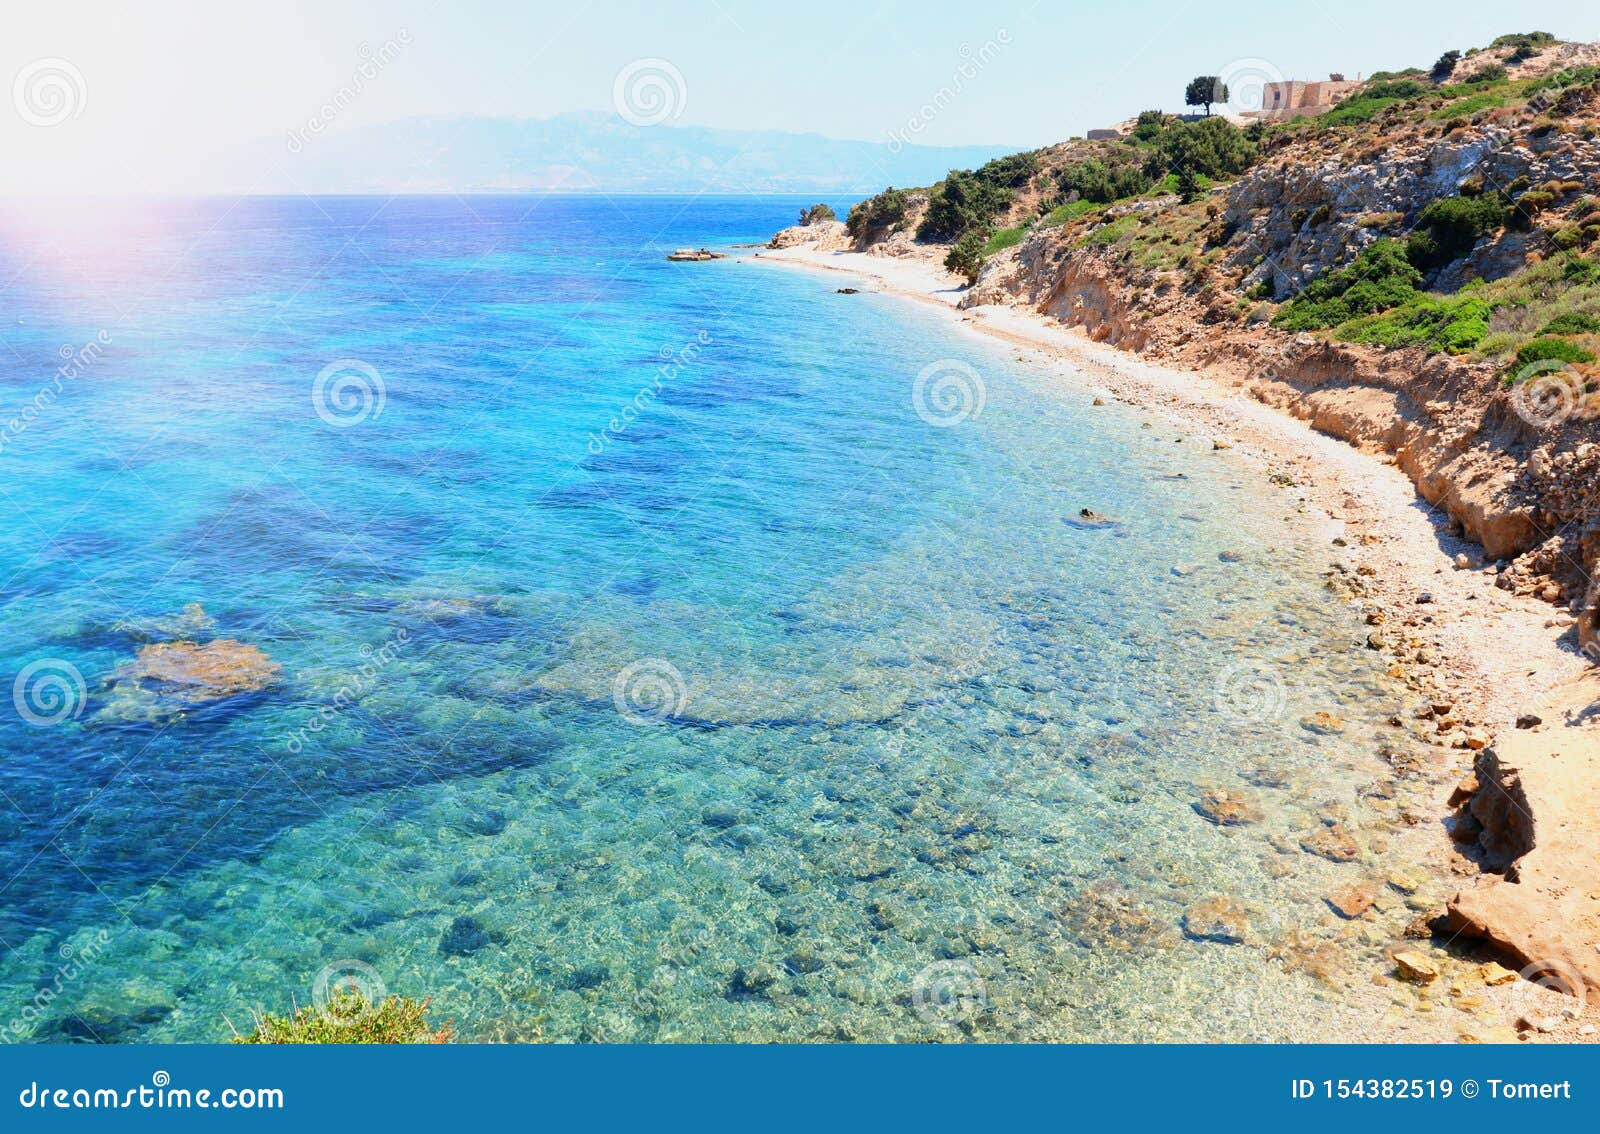 Nature Image of the Beautiful Mediterranean Sea with Mountains at